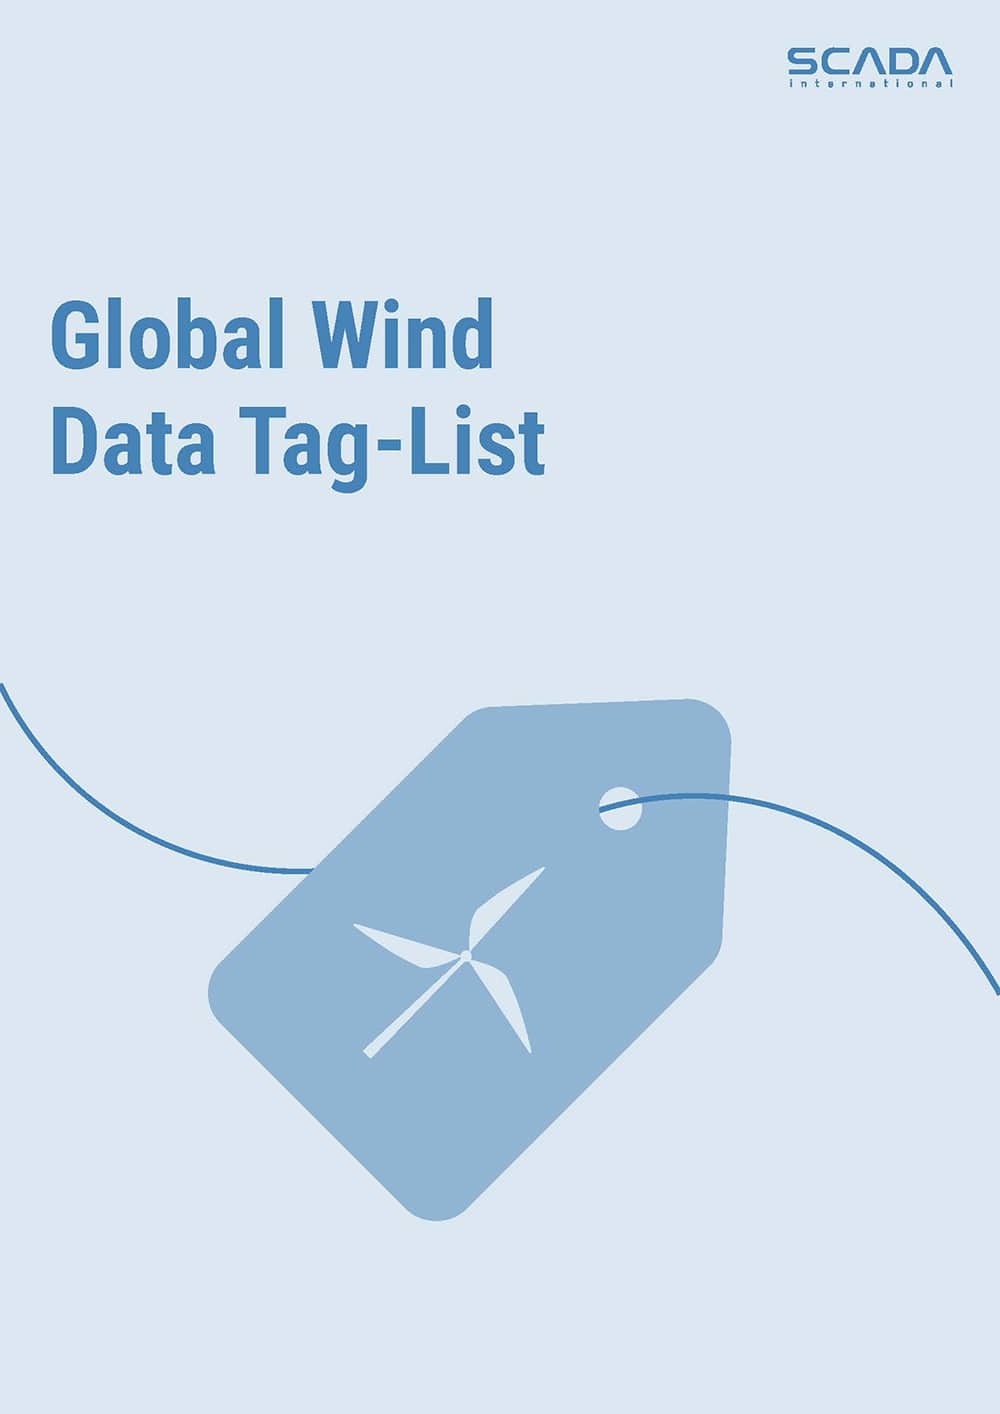 Graphic for the cover of the Global Wind Data Tag-List with a light blue background and a tag with a wind turbine